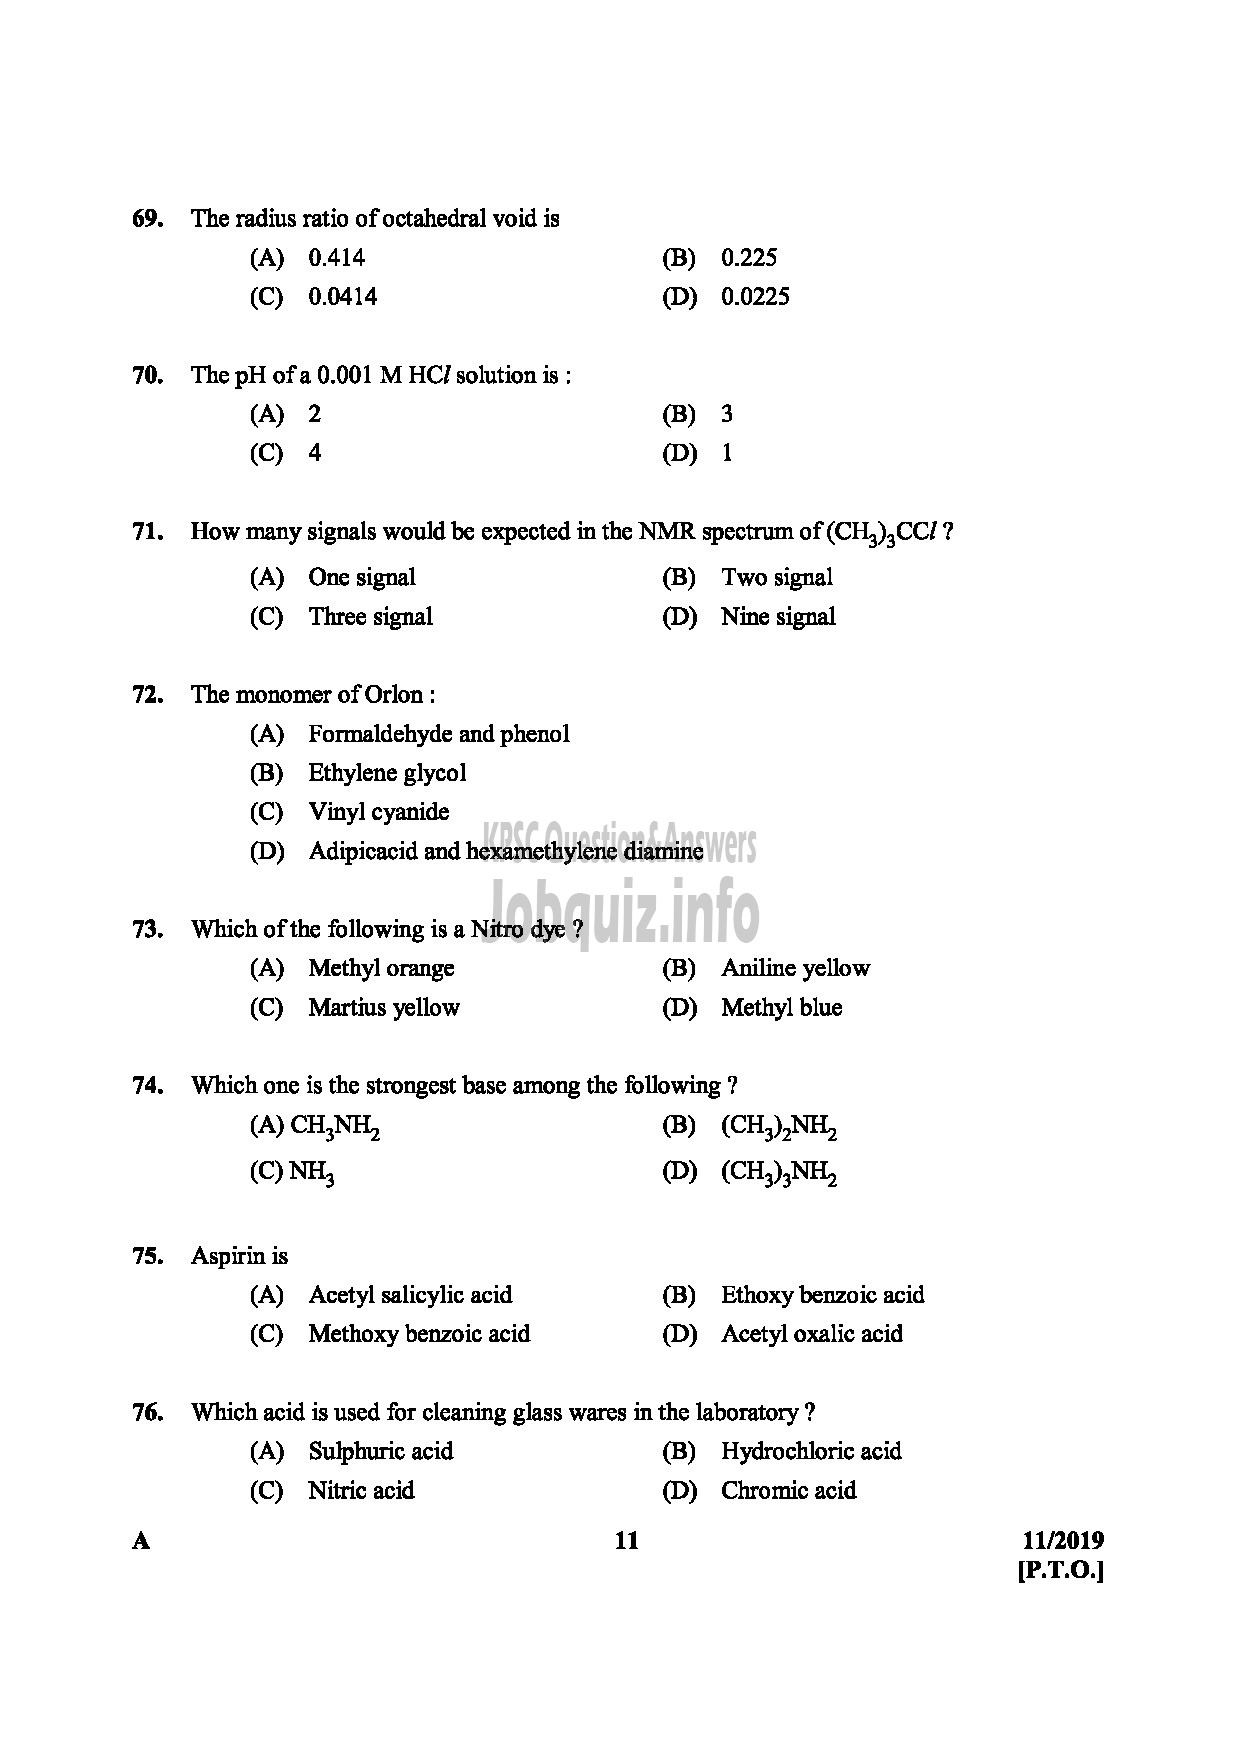 Kerala PSC Question Paper - SANITARY CHEMIST KERALA WATER AUTHORITY TECHNICAL ASSISTANT CHEMICAL EXAMINERS LABORATORY LAB ASSISTANT-11